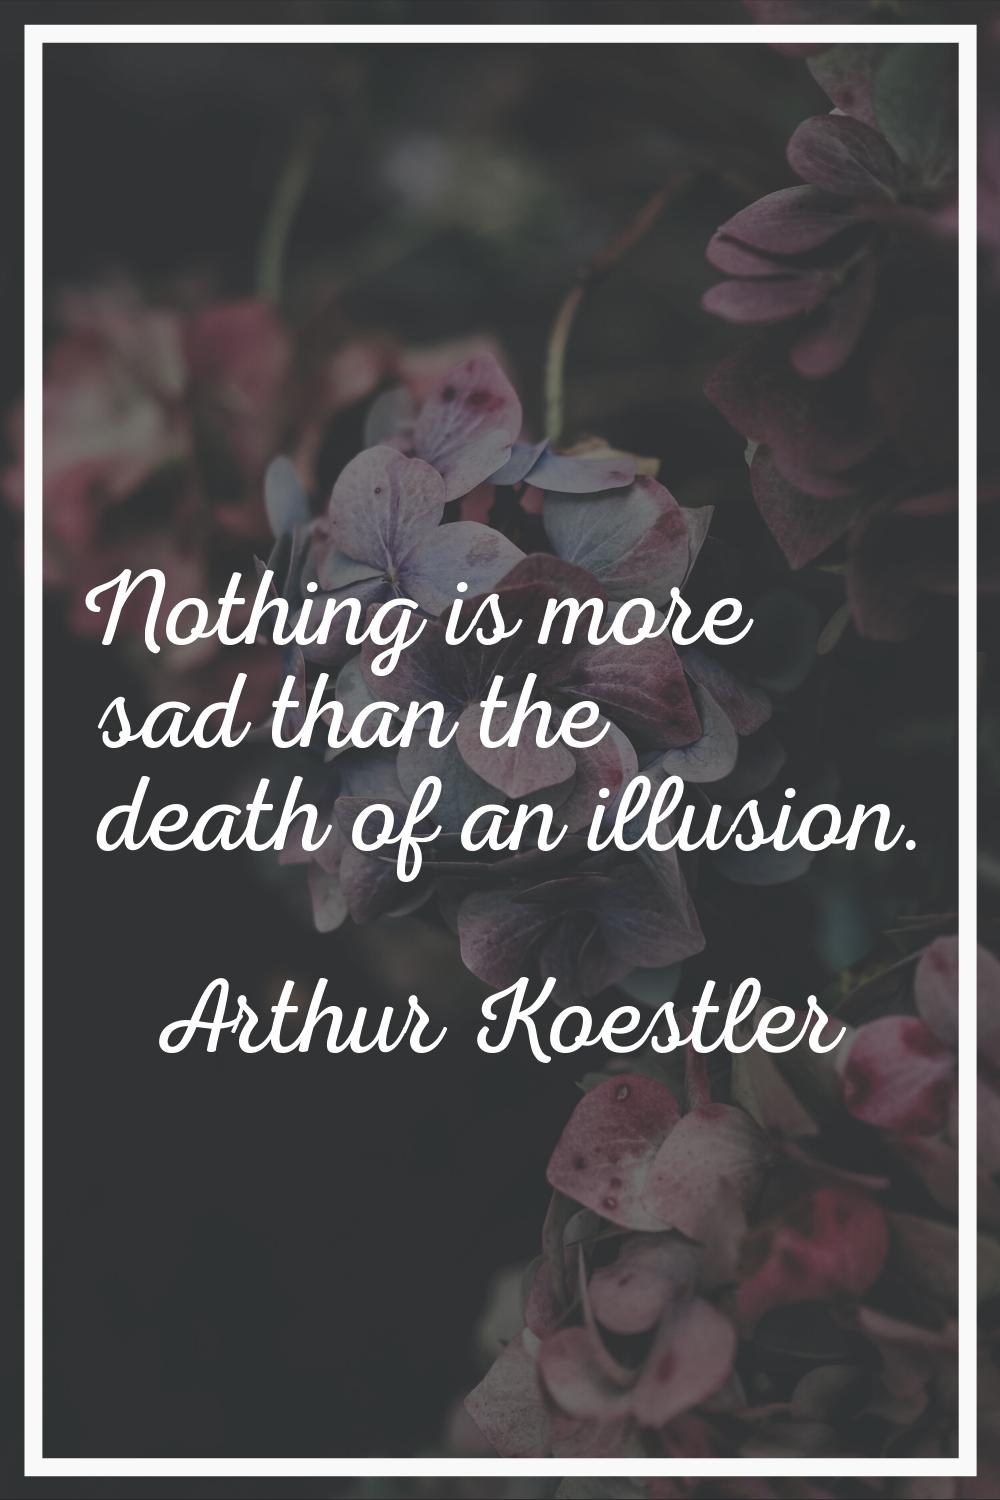 Nothing is more sad than the death of an illusion.